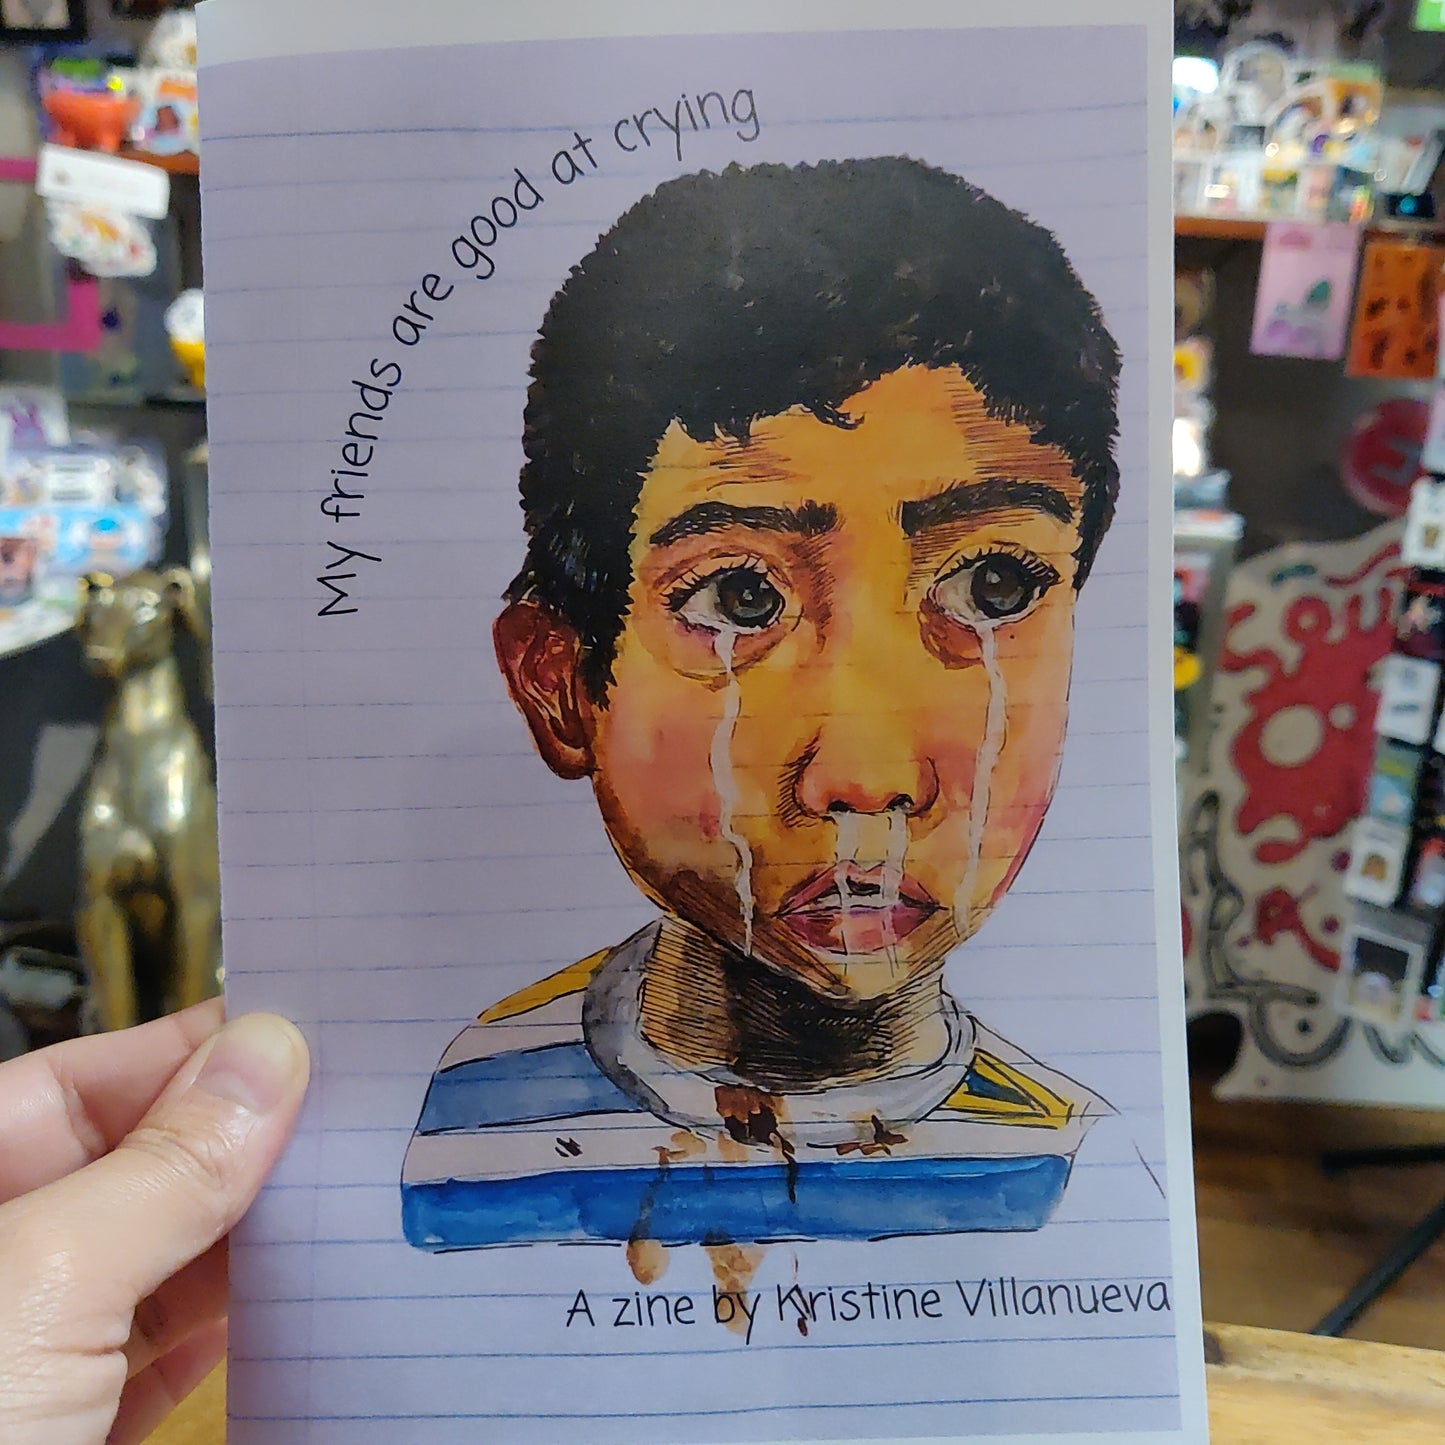 My friends are good at crying ZiNE